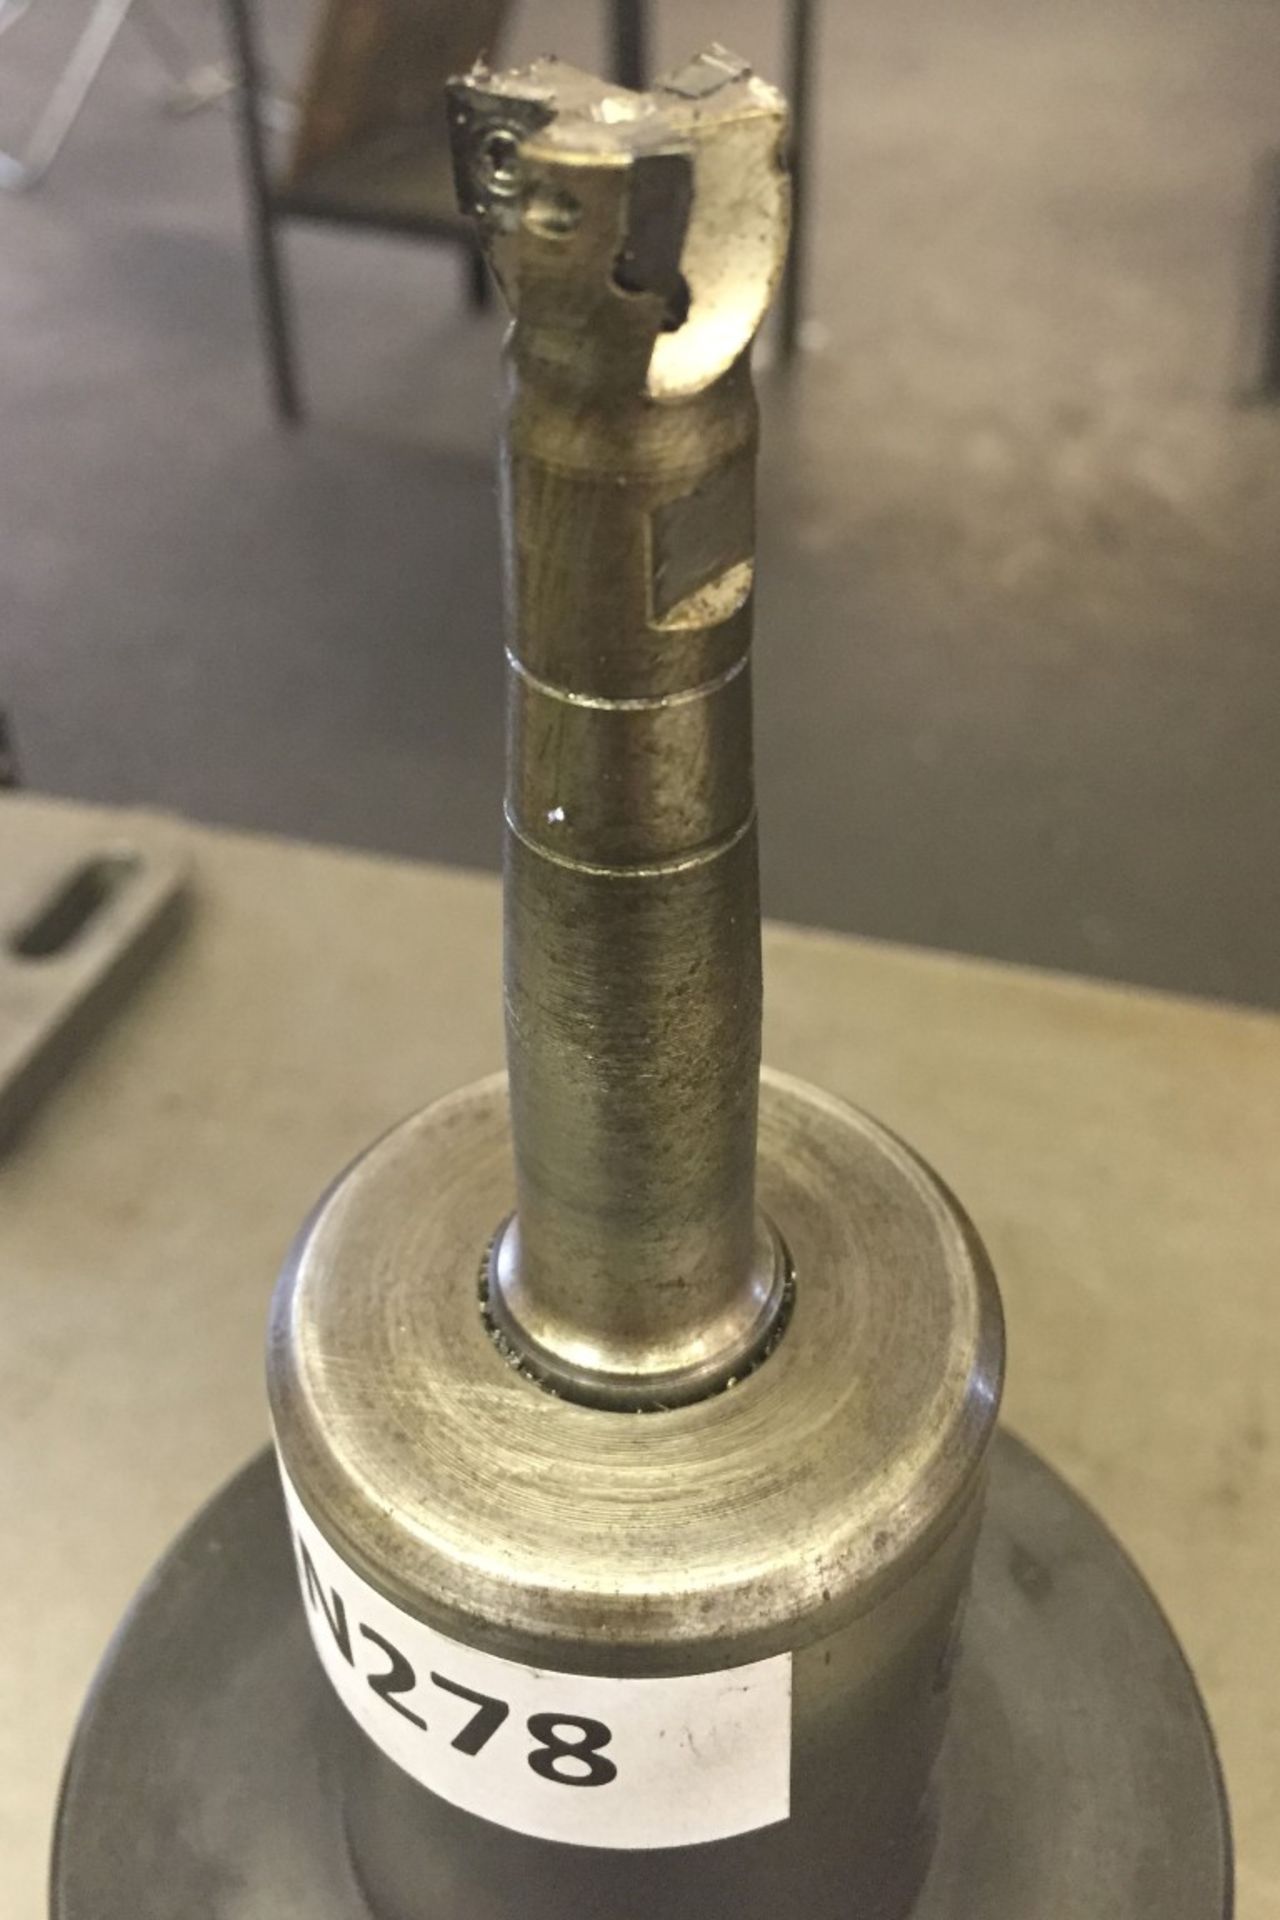 1 x CNC / VMC Mill Chuck and milling cutter - CL202 - Ref EN278 - Location: Altrincham WA14 - Image 3 of 3